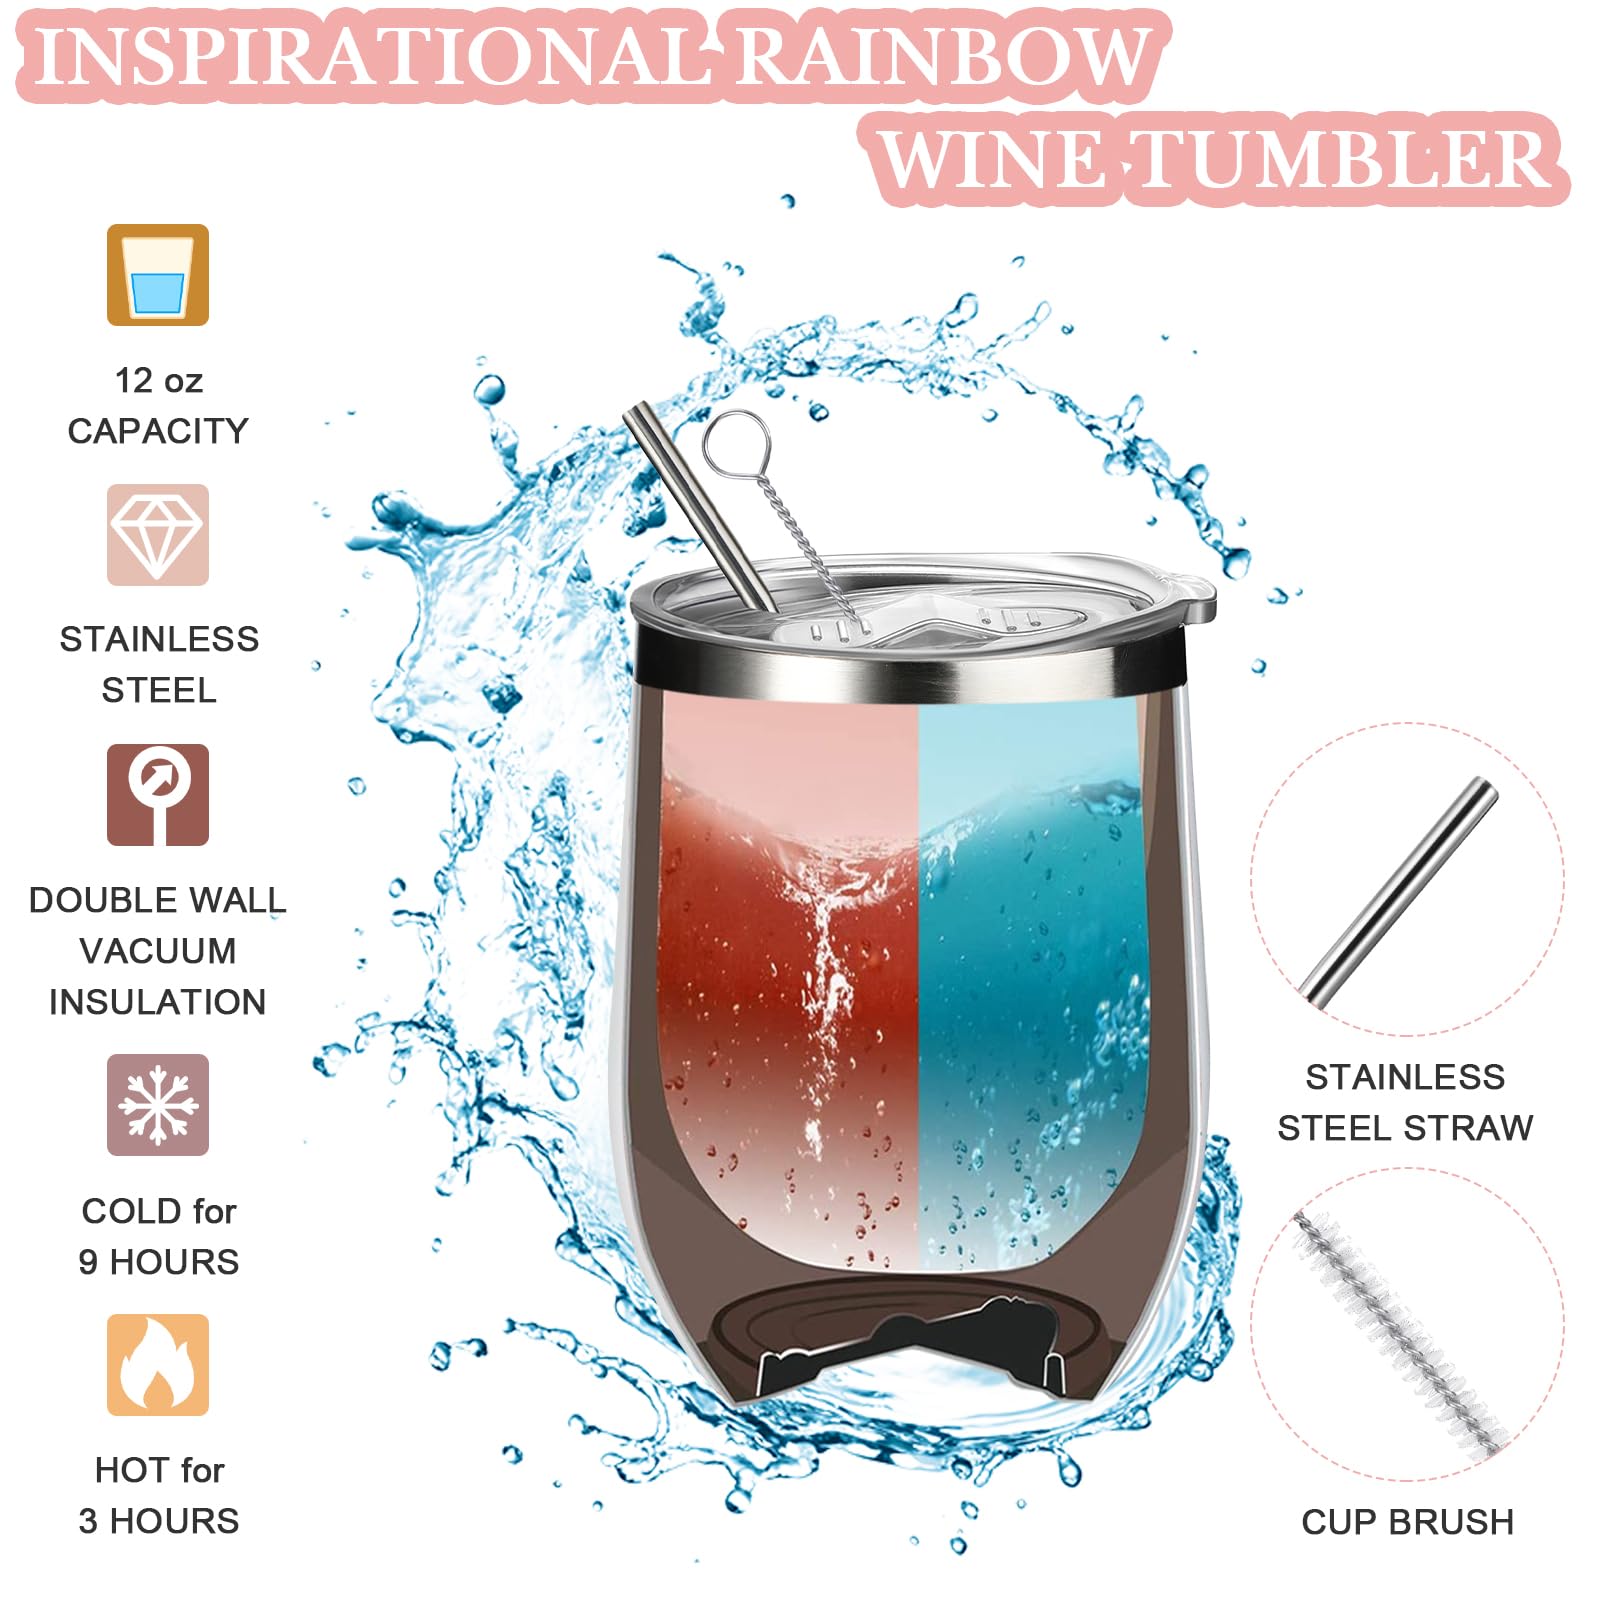 Hillban 18 Pcs Inspirational Gifts Bulk 6 Inspirational Rainbow Bags 6 Thank You Wine Tumbler 6 Motivational Keychains for Students Girls Graduation Friends Coworkers Employee Appreciation Gift